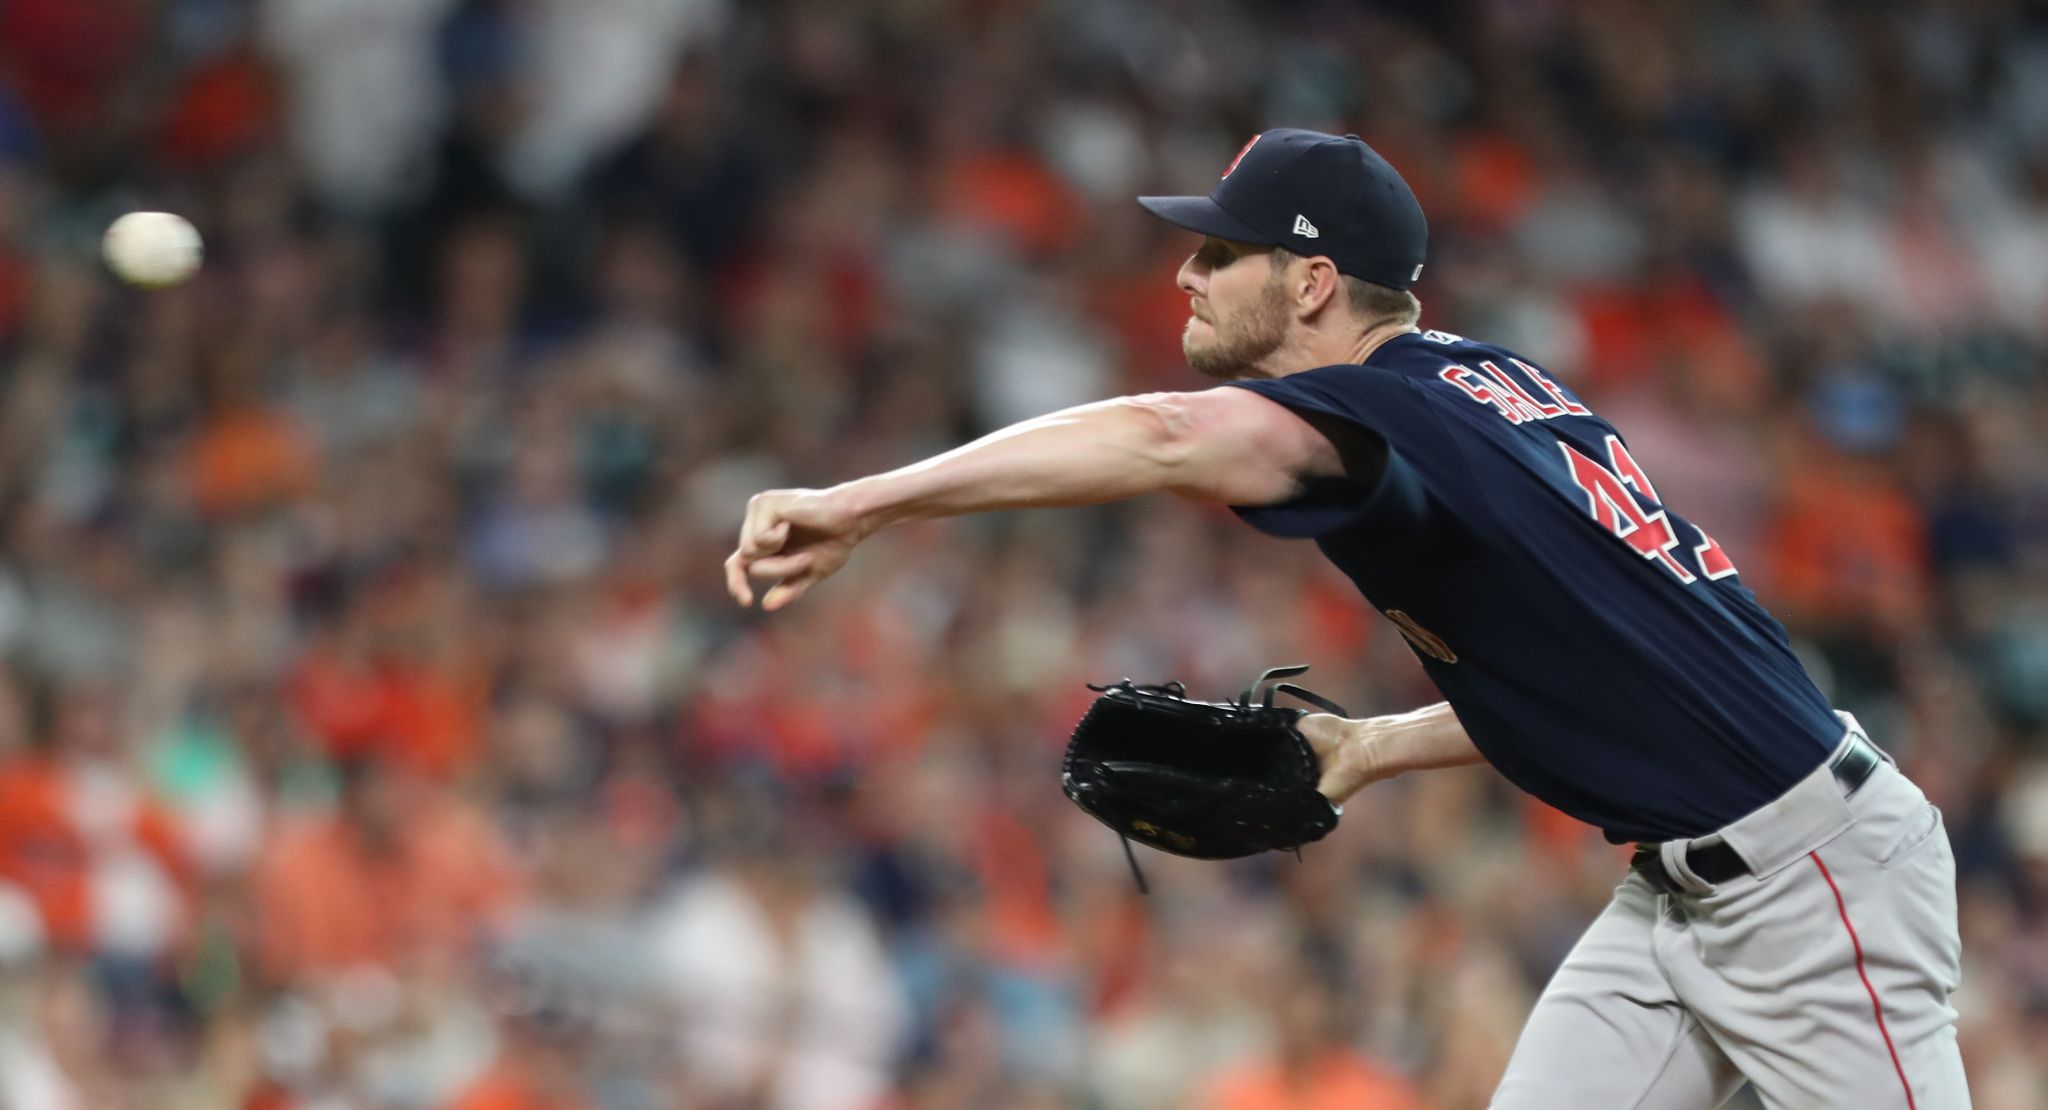 Sox ace Chris Sale will pitch in ALCS against Astros, but Cora won't  specify when